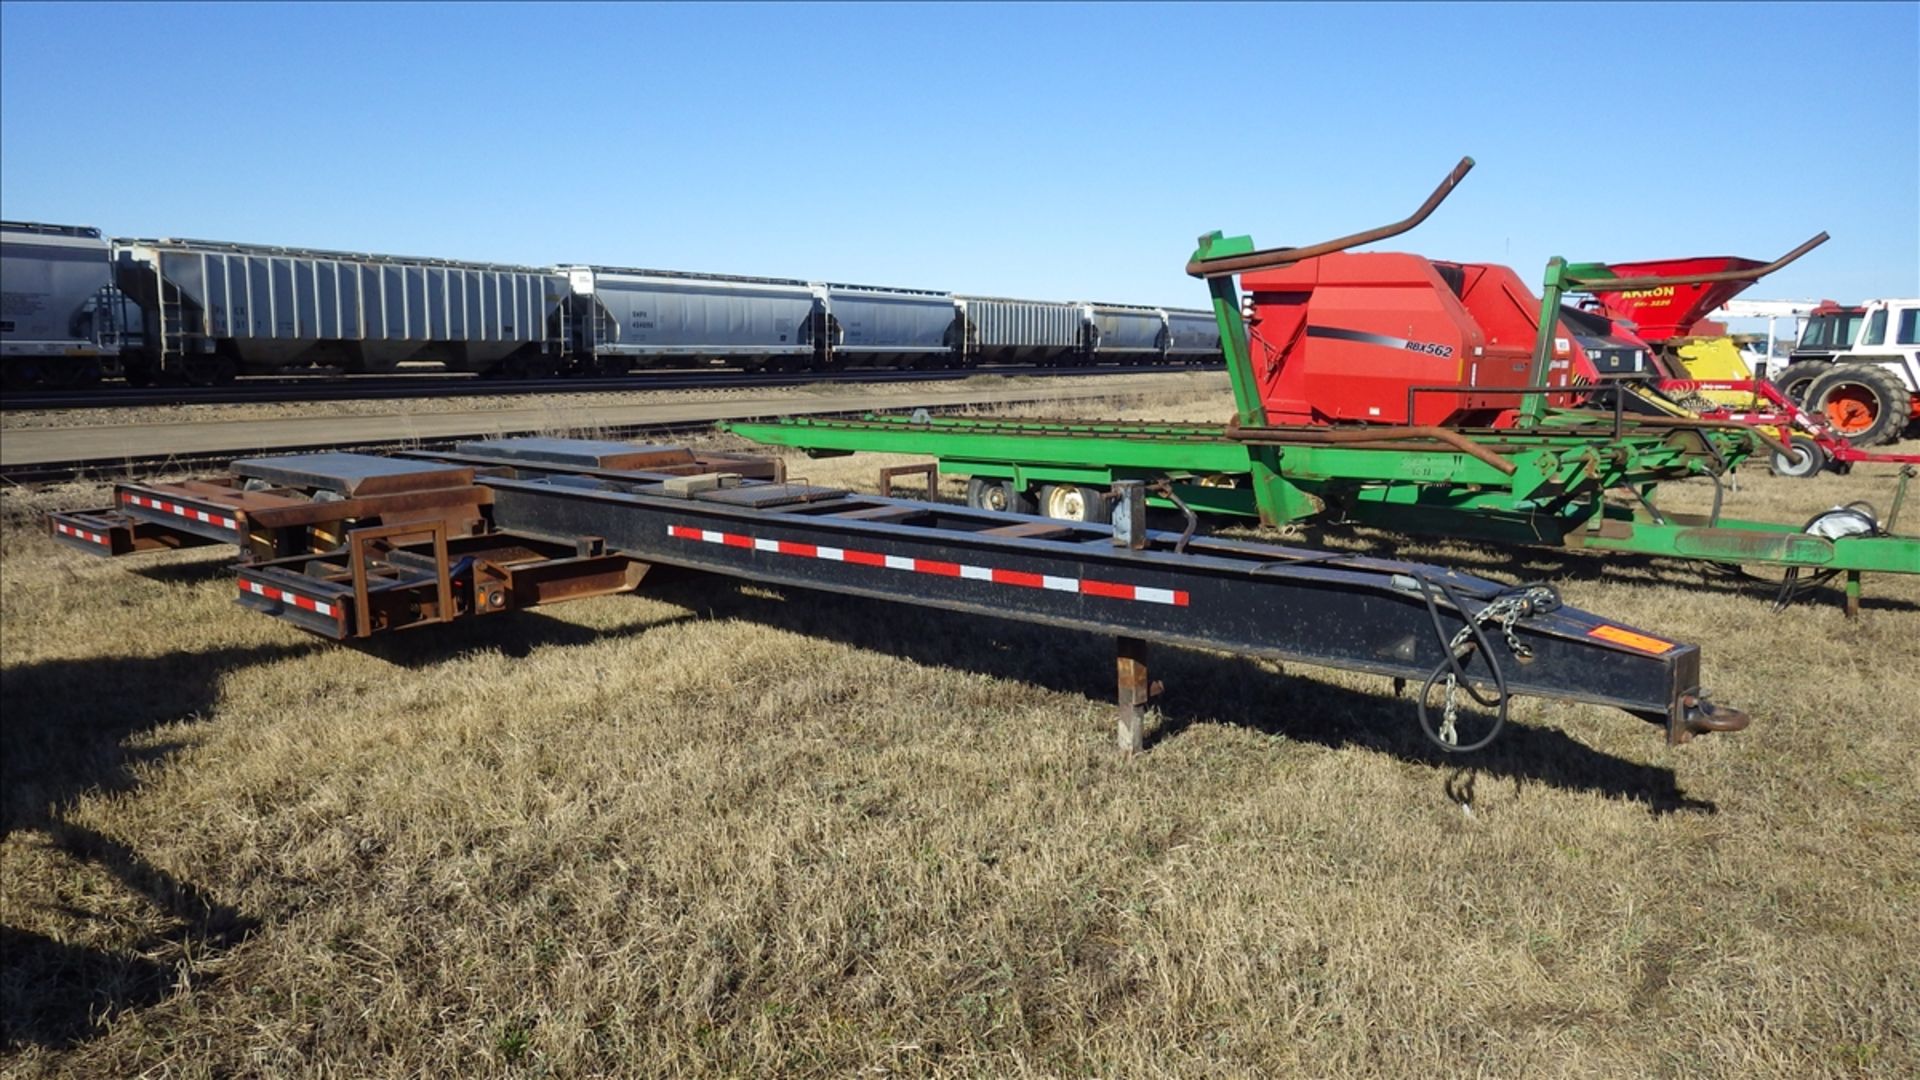 Trailtech Tandem Axle pintle hitch low boy sprayer transport trailer with pintle hitch at rear. Tire - Image 2 of 7